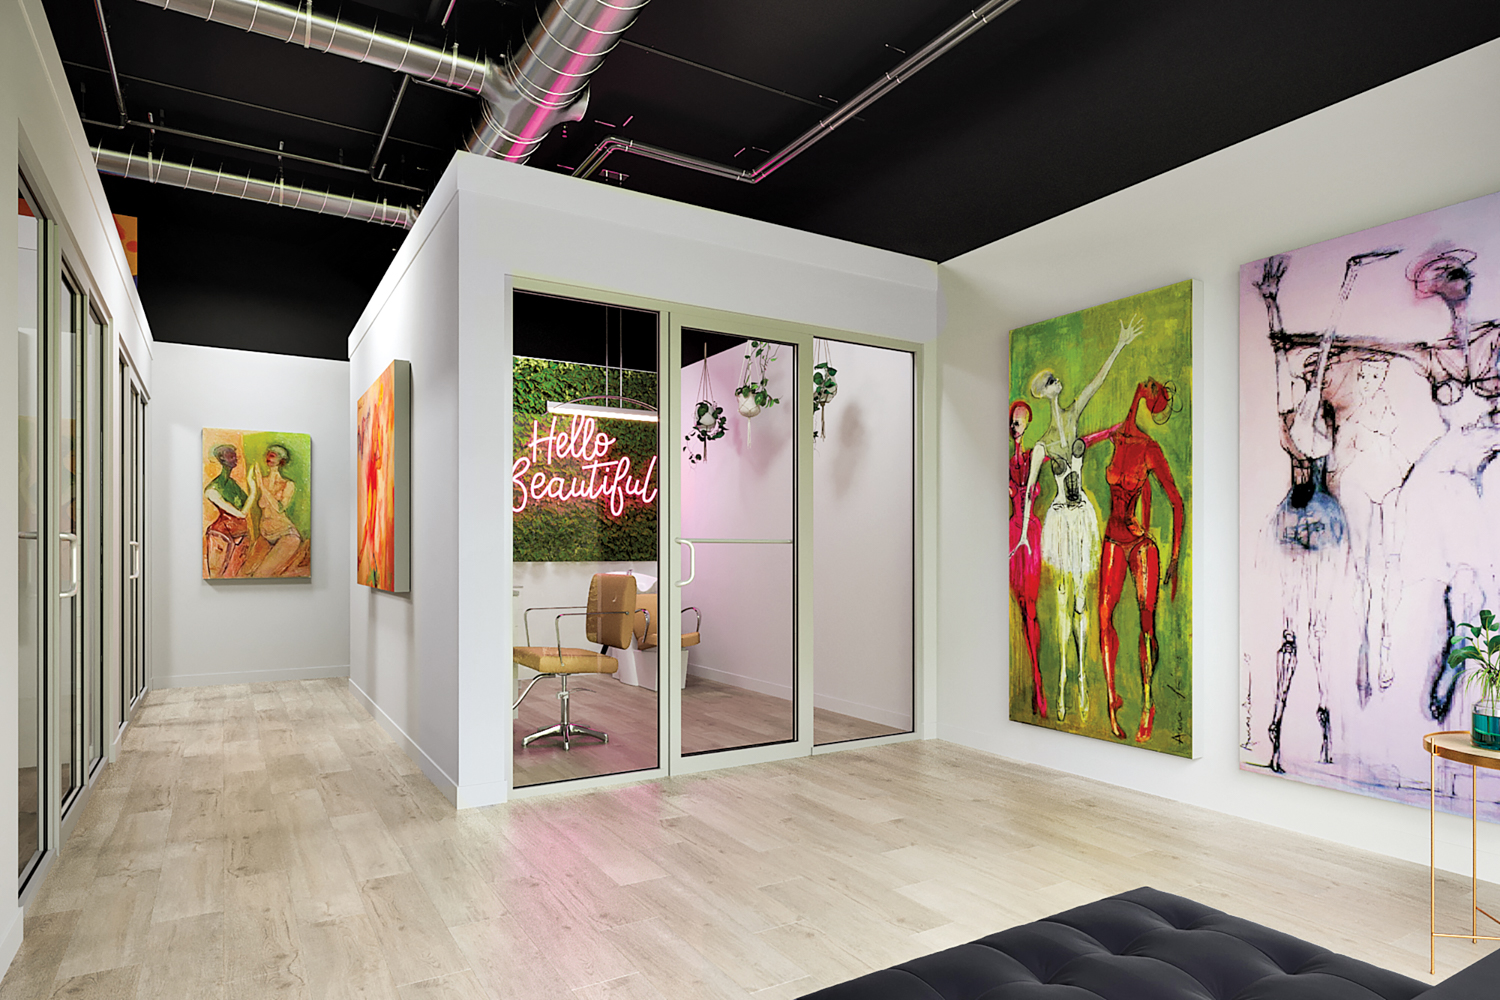 Paintings on white walls flank an office with floor-to-ceiling windows and doors with neon “hello beautiful” sign against greenery wall